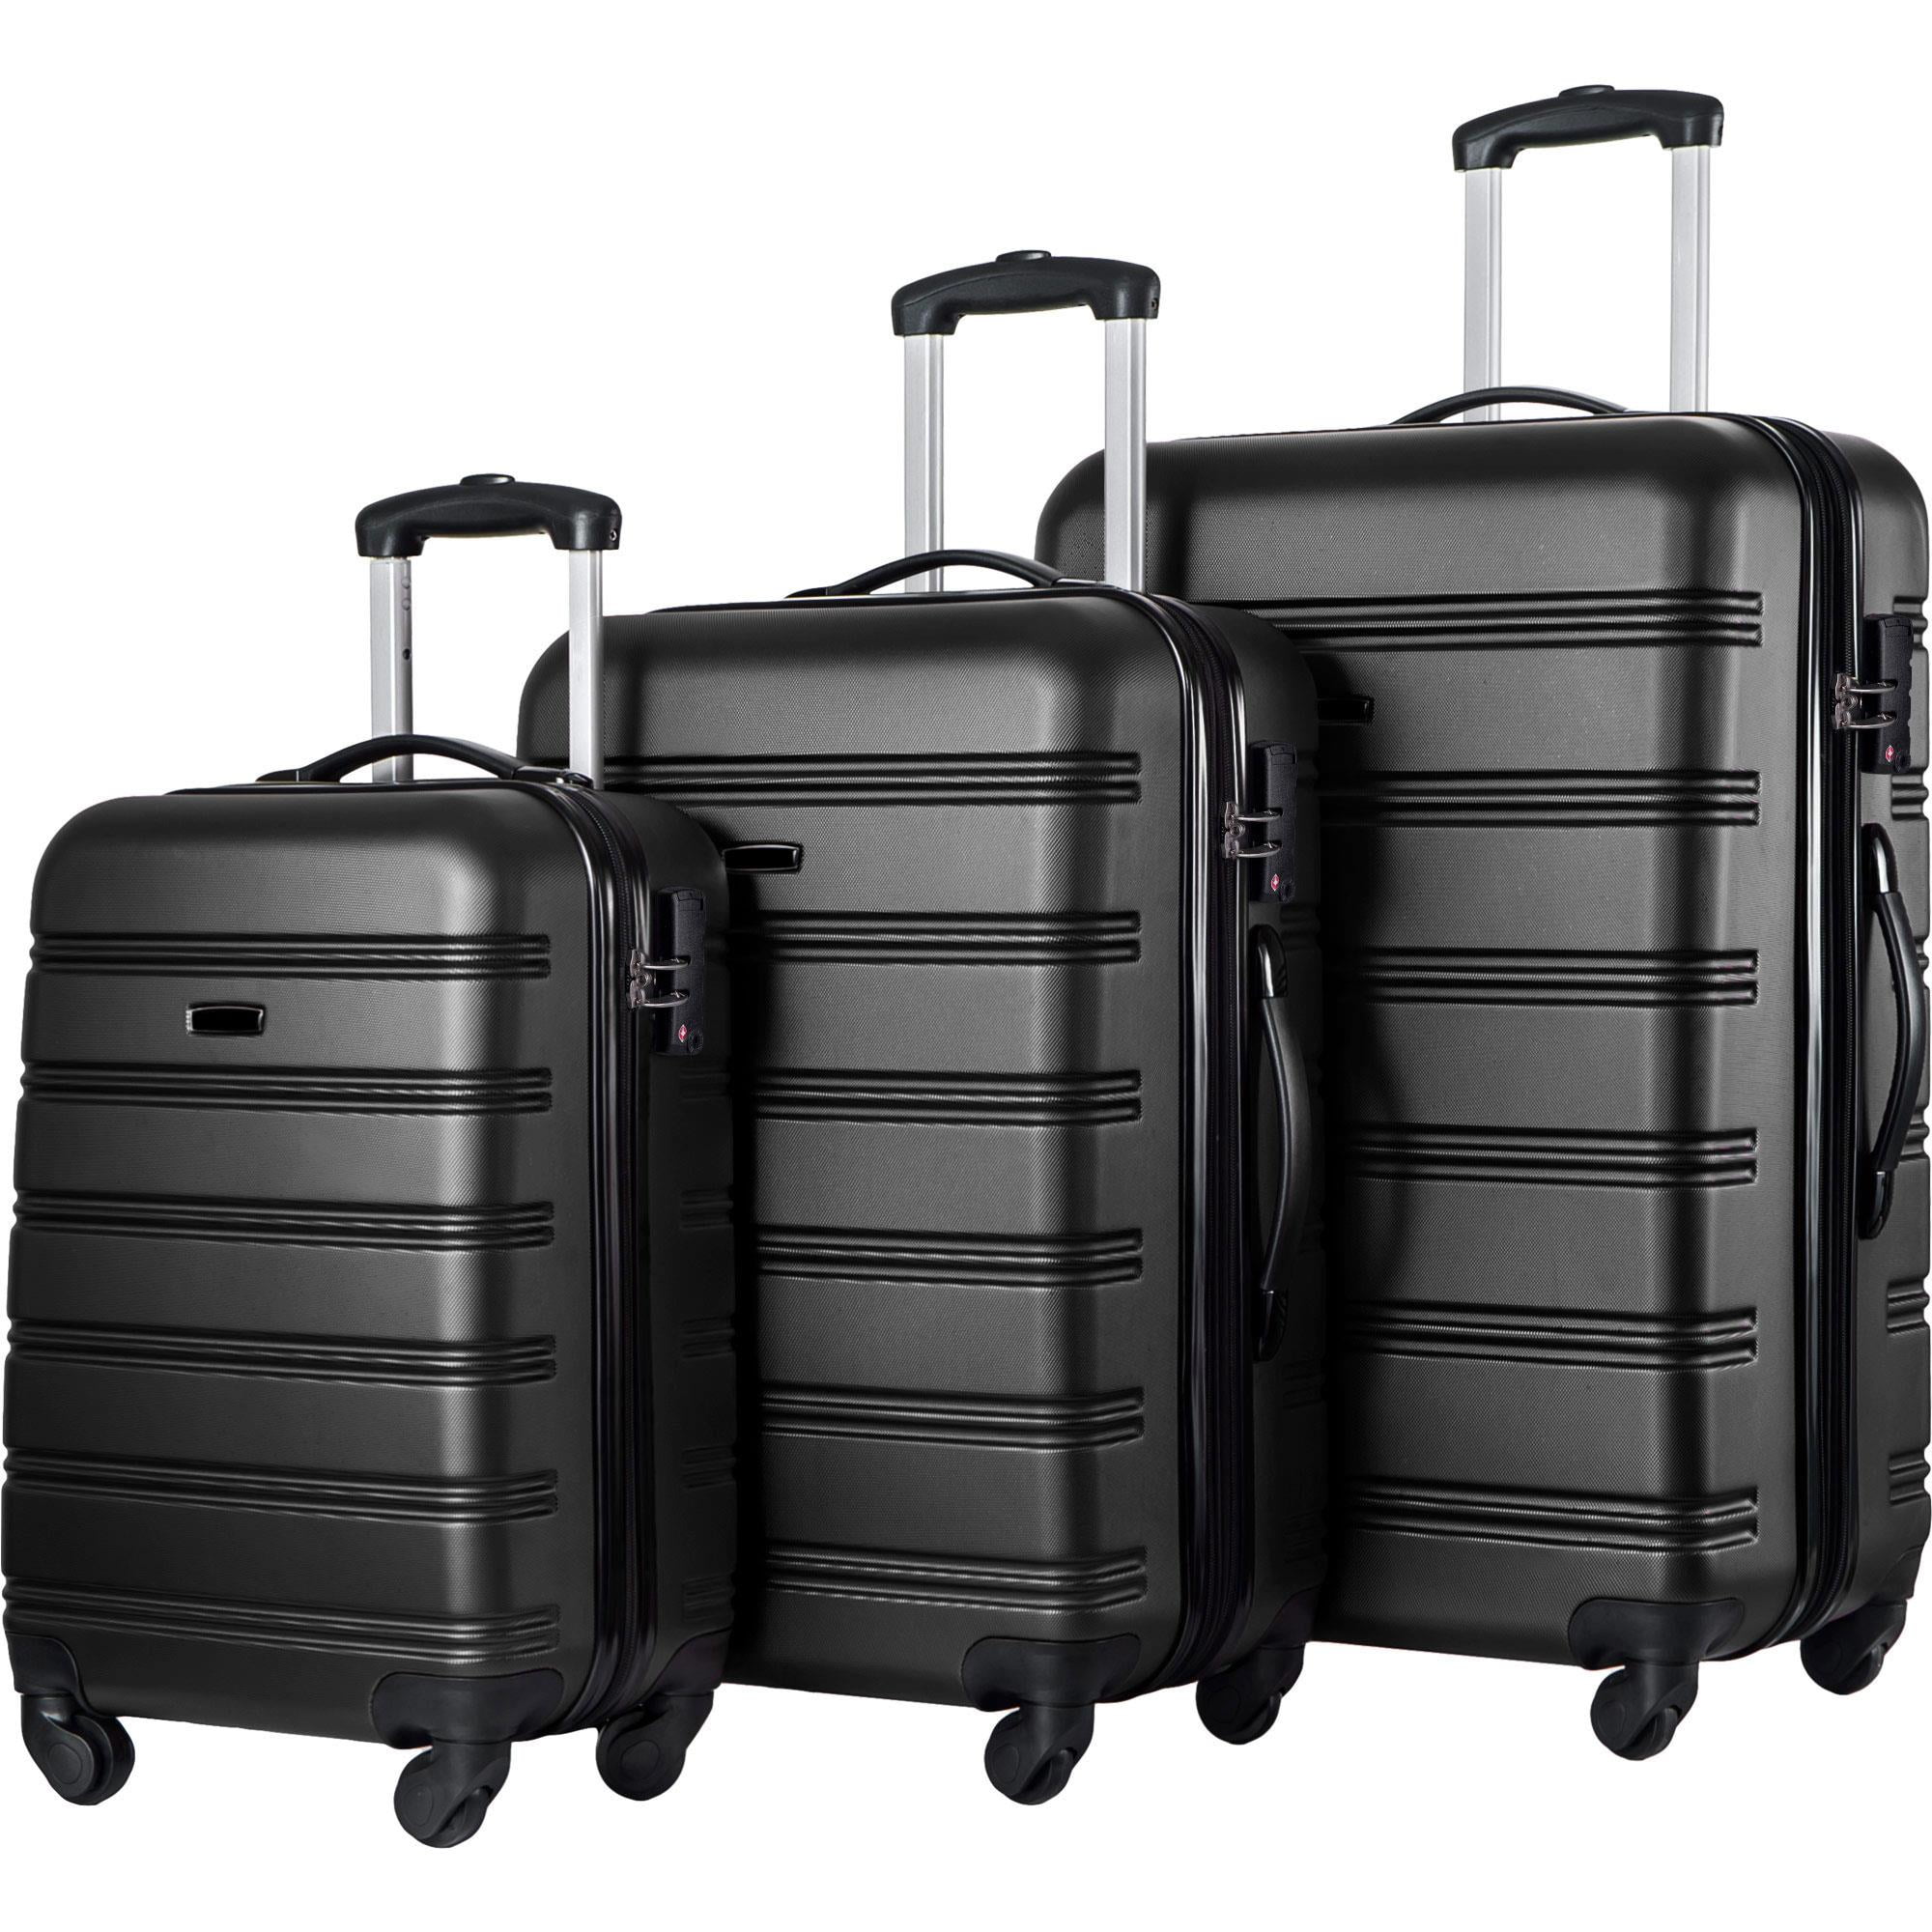 XQ 24-inch high-end travel suitcase 28-inch expandable universal